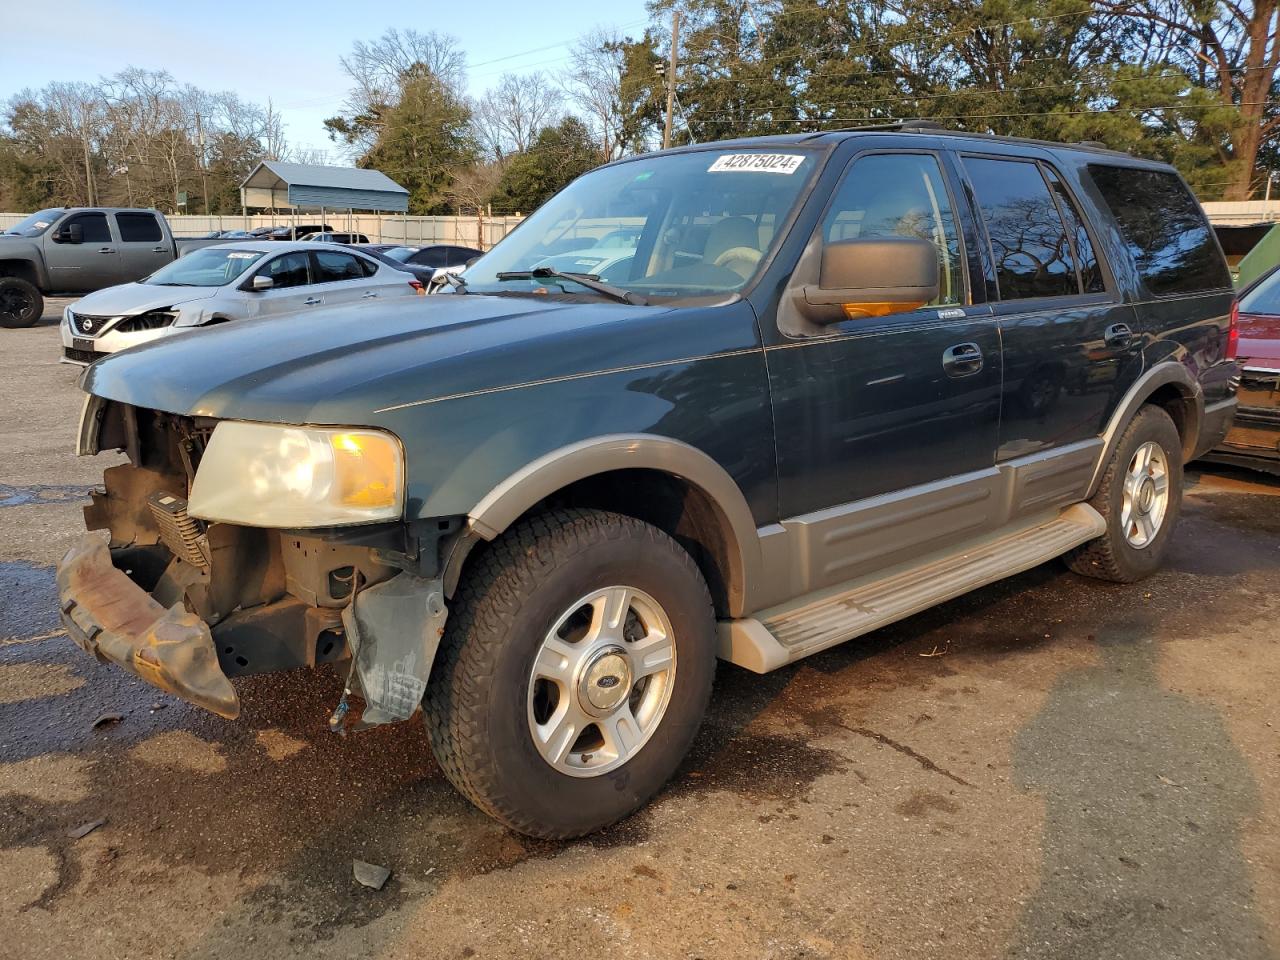 1FMRU17W93LB89340  - FORD EXPEDITION  2003 IMG - 0